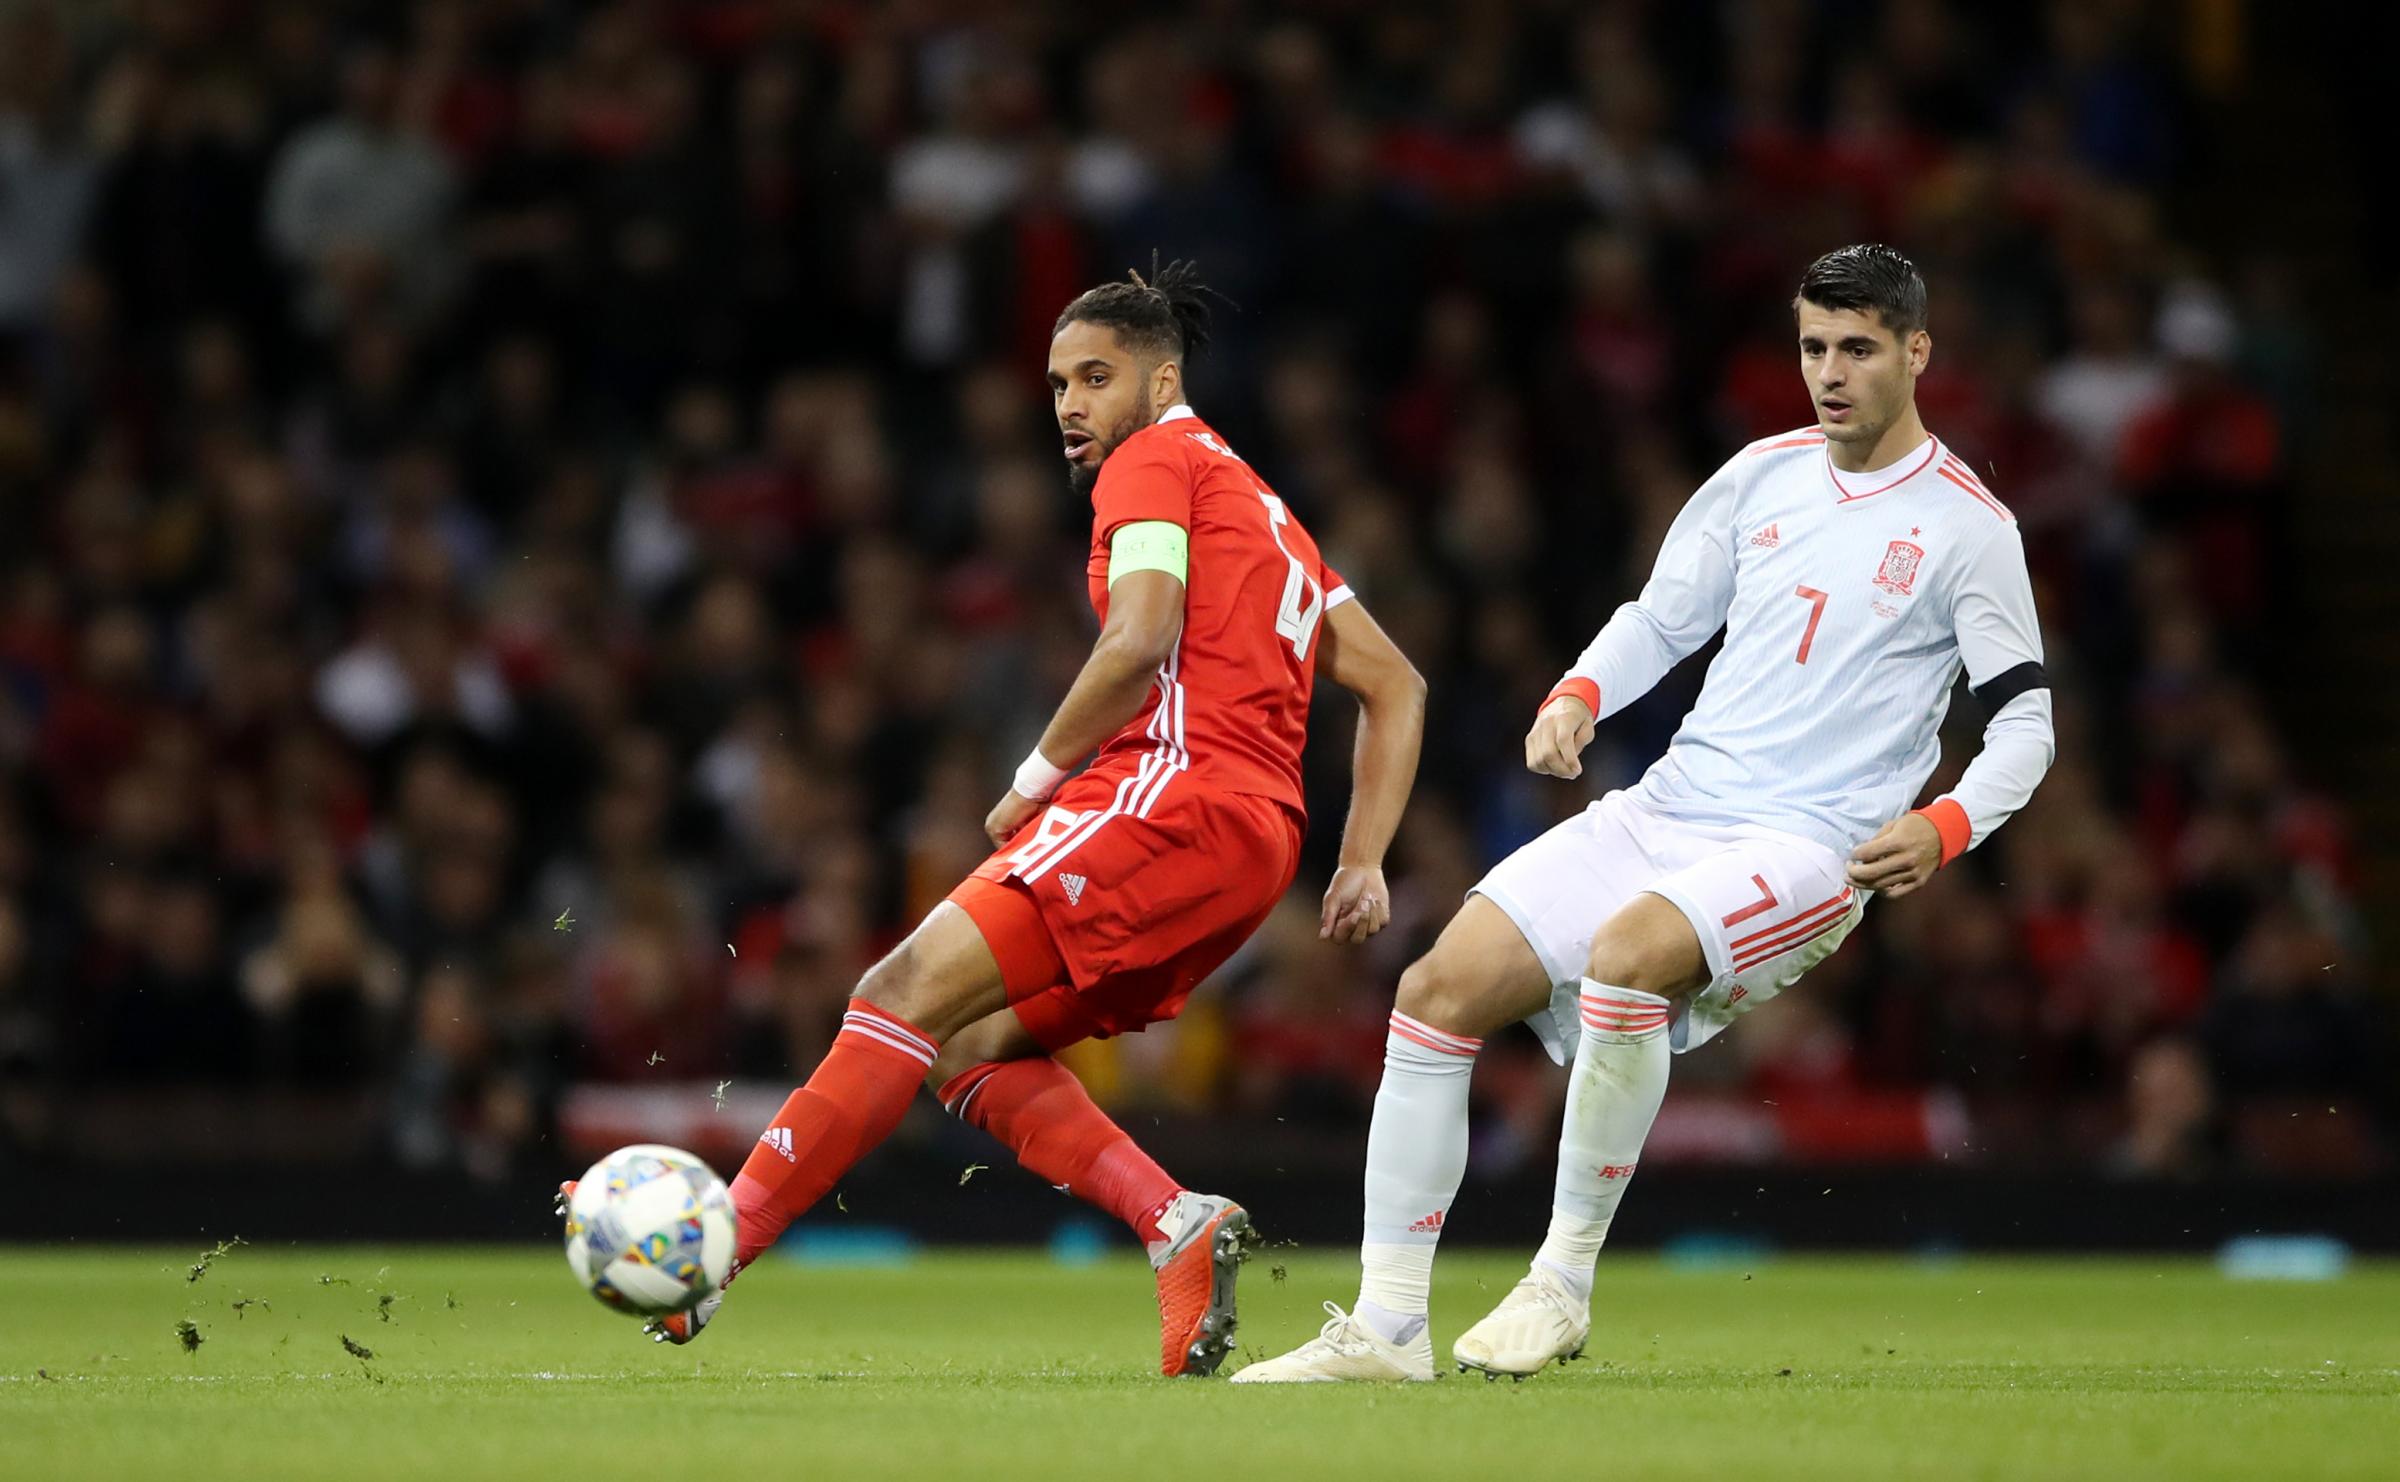 Wales Ashley Williams (left) and Spains Alvaro Morata (centre) during the International Friendly match at the Principality Stadium, Cardiff..